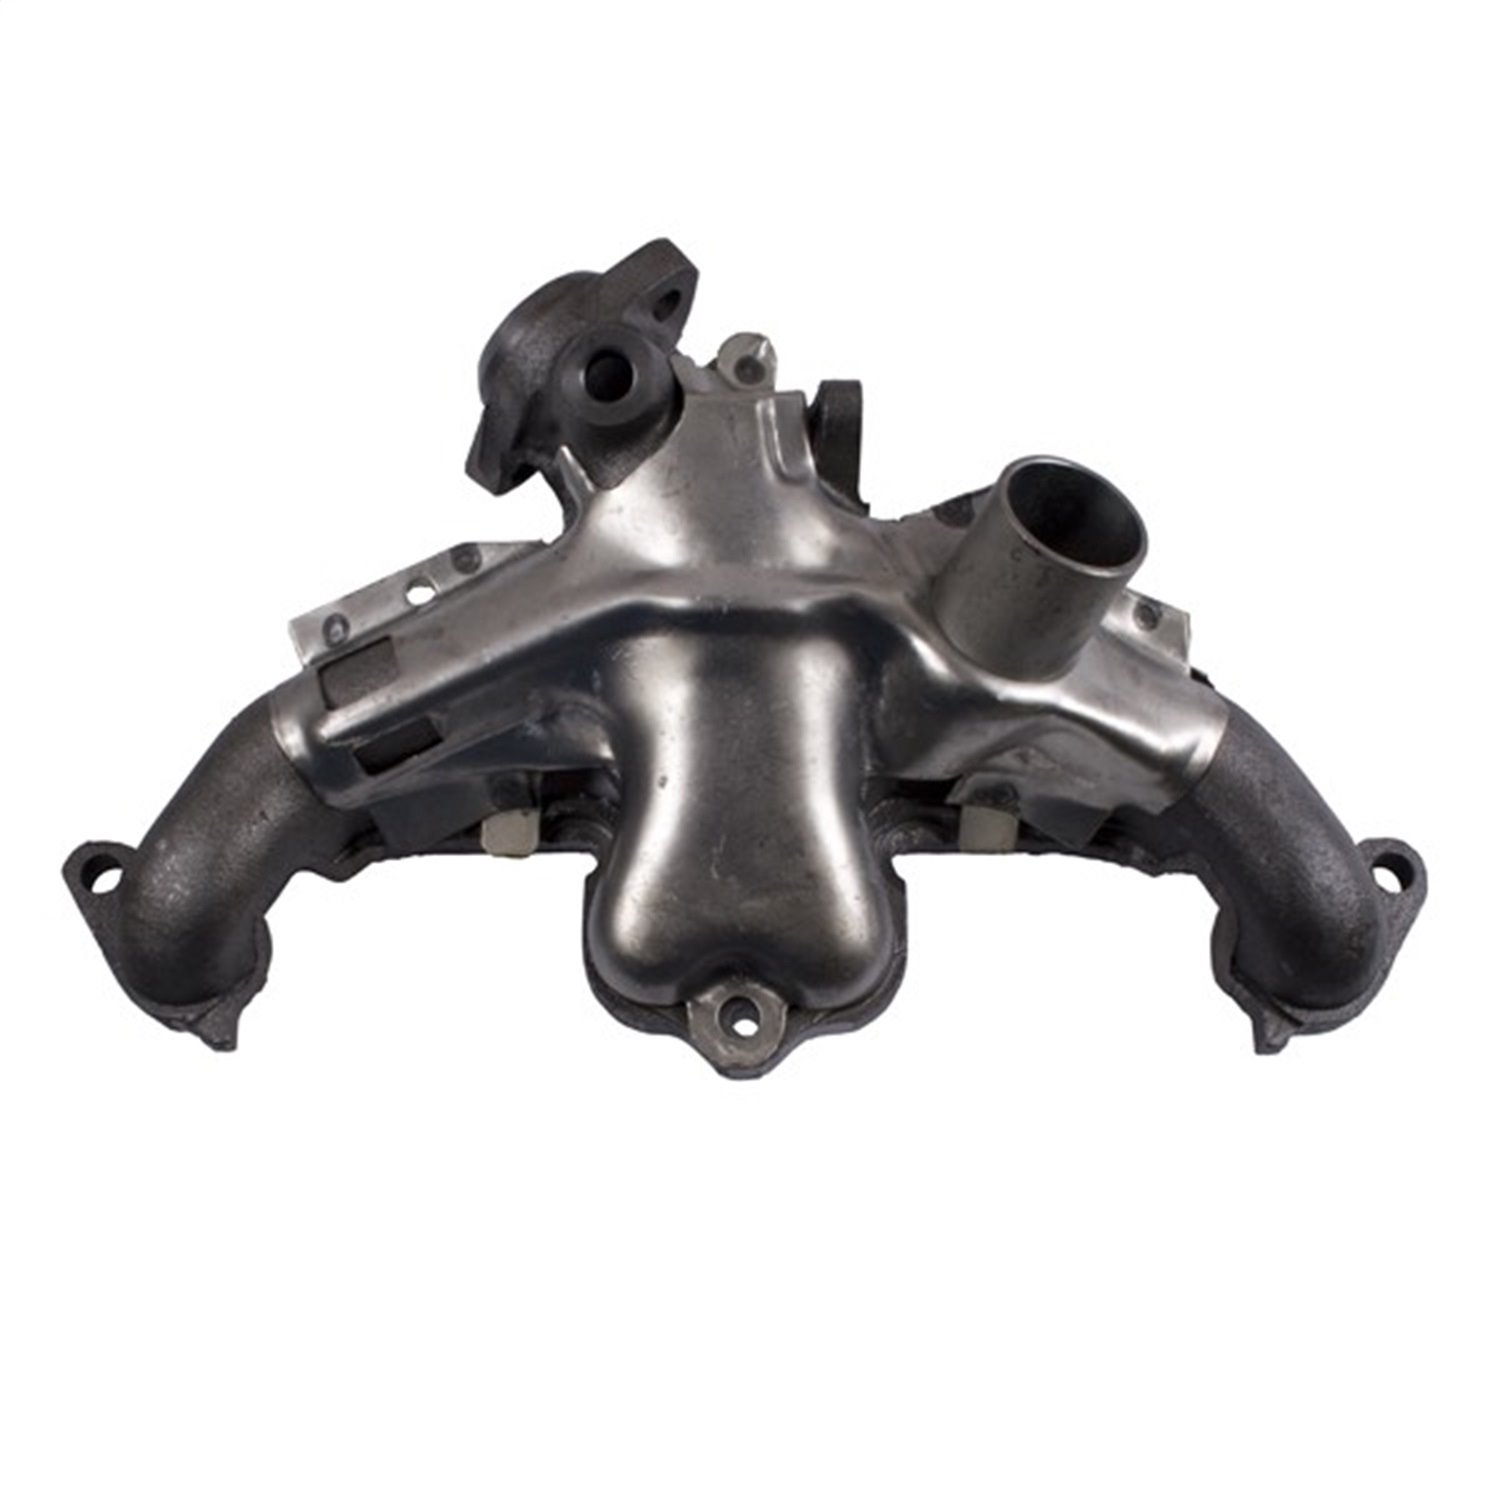 Replacement exhaust manifold from Omix-ADA, Fits 84-90 Jeep models with a 2.5 liter engine.